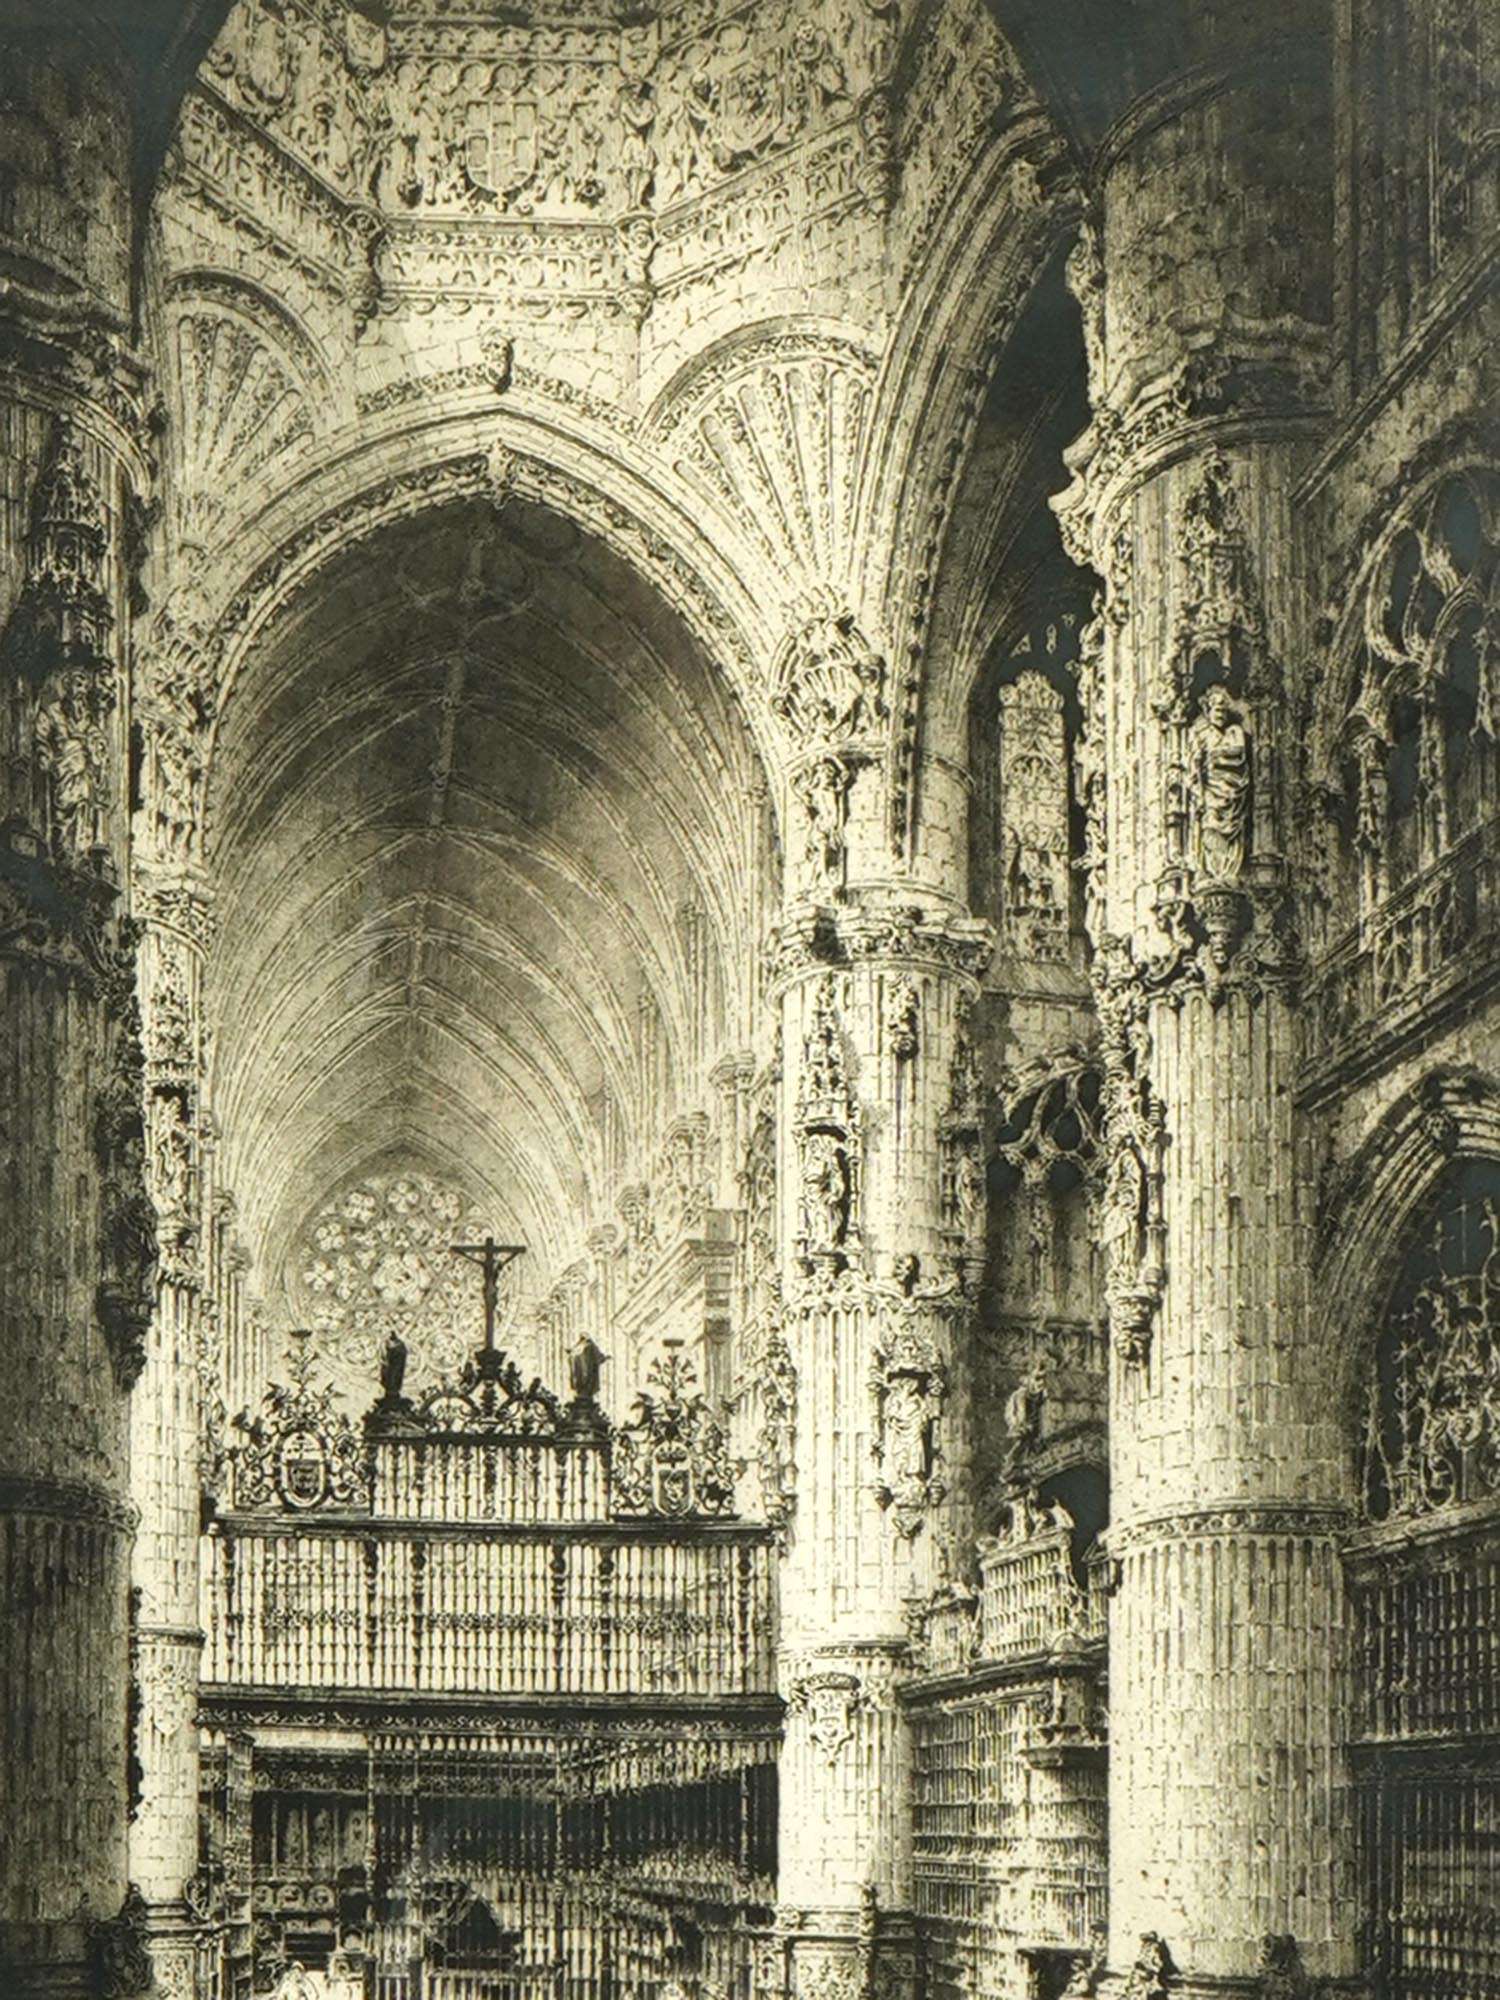 VIEW OF BURGOS CATHEDRAL ETCHING BY ALBANY HOWARTH PIC-1